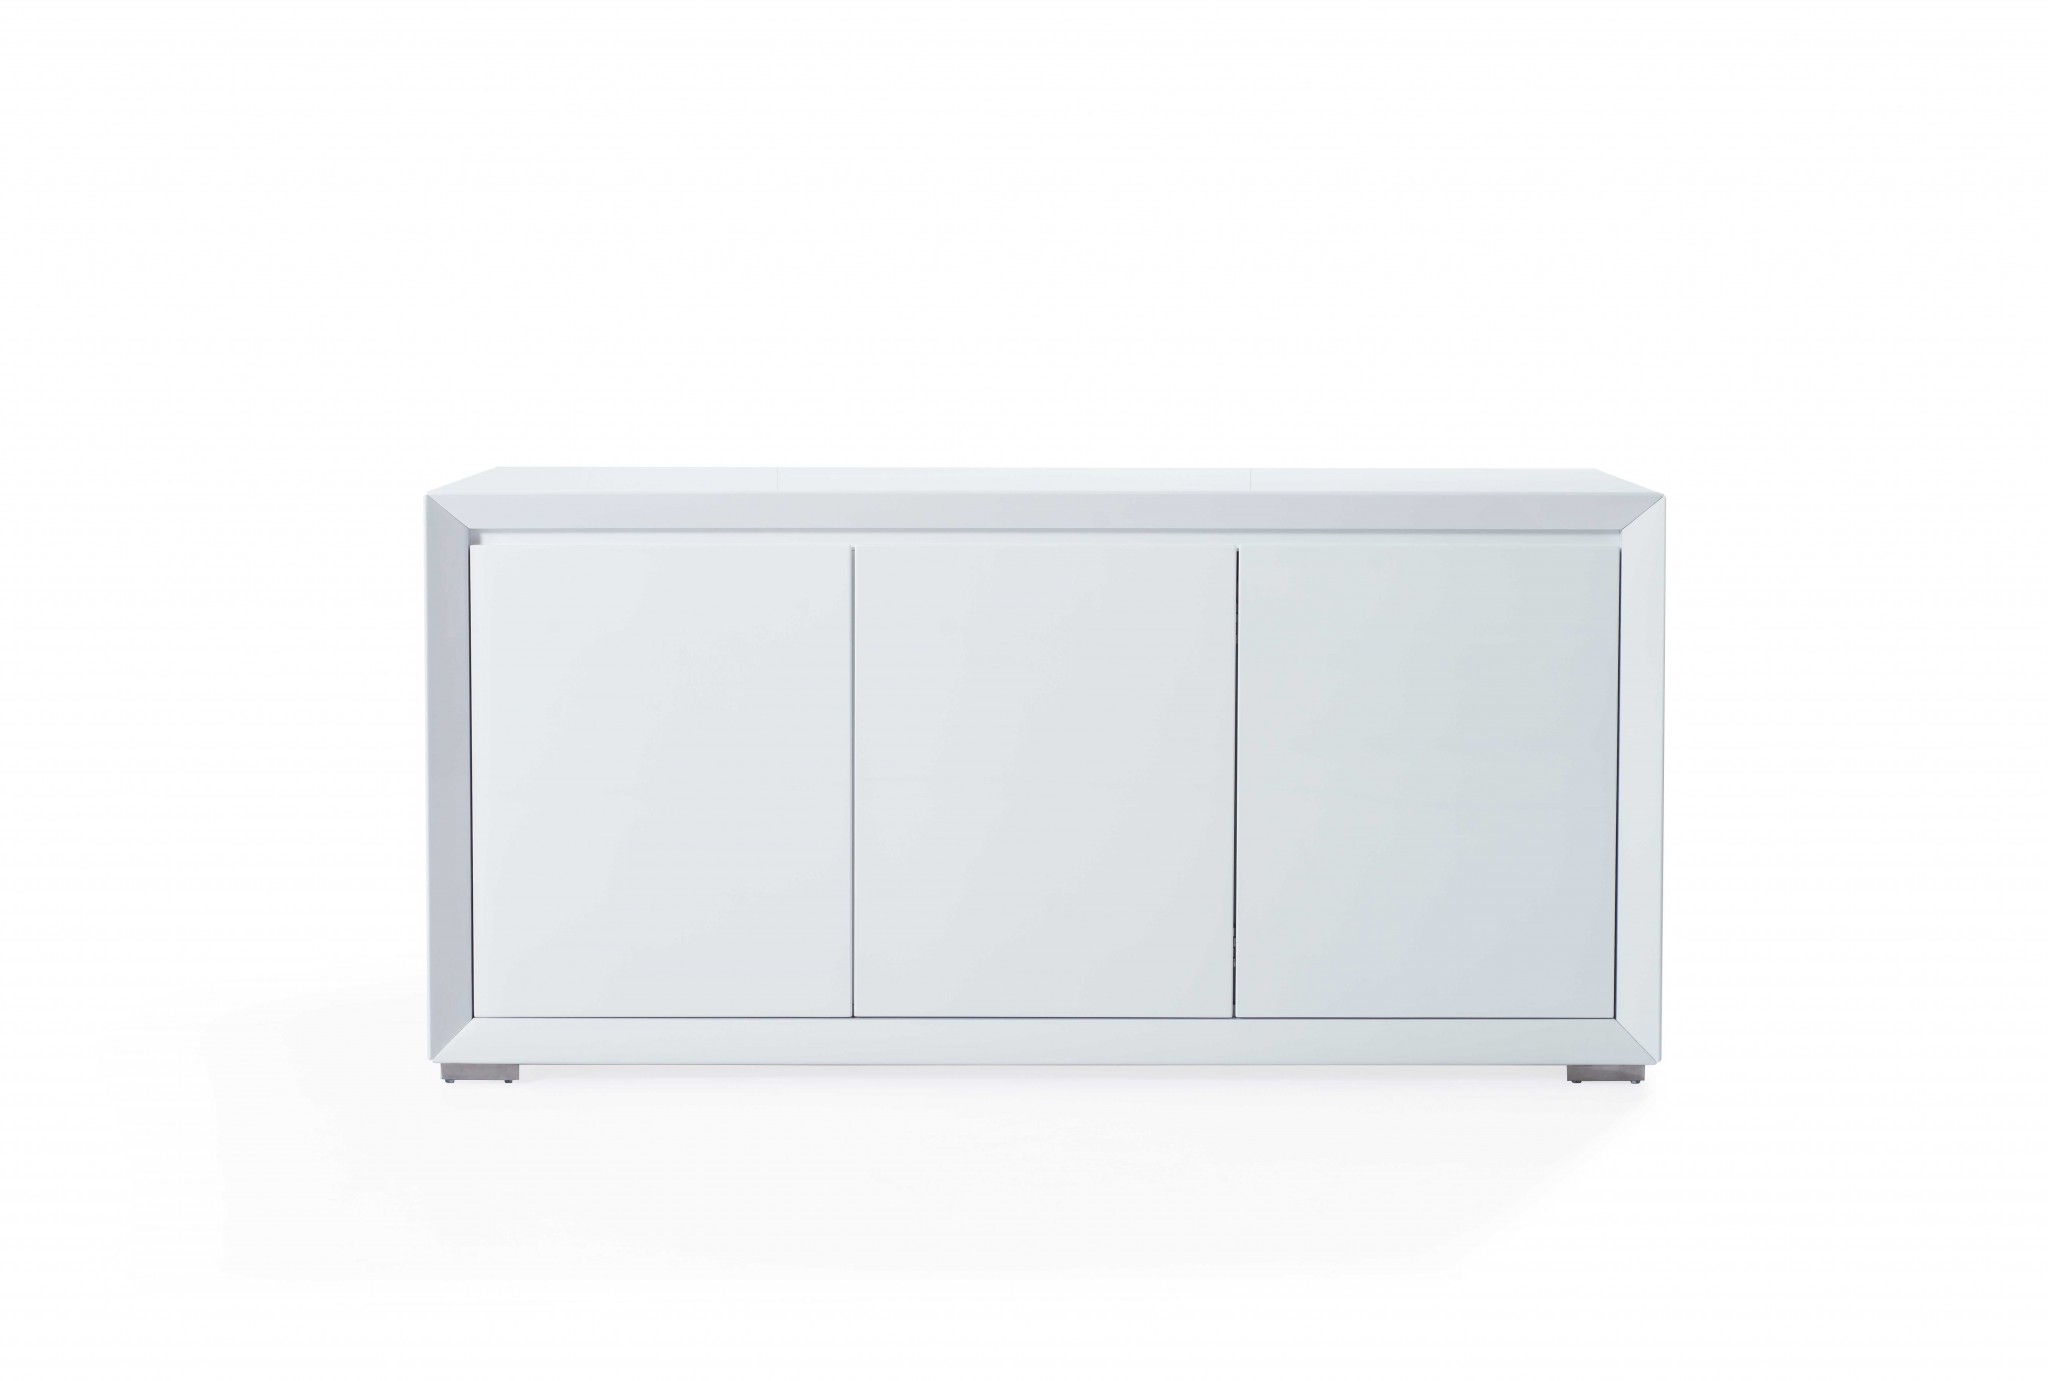 61" X 20" X 30" White Stainless Steel Buffet